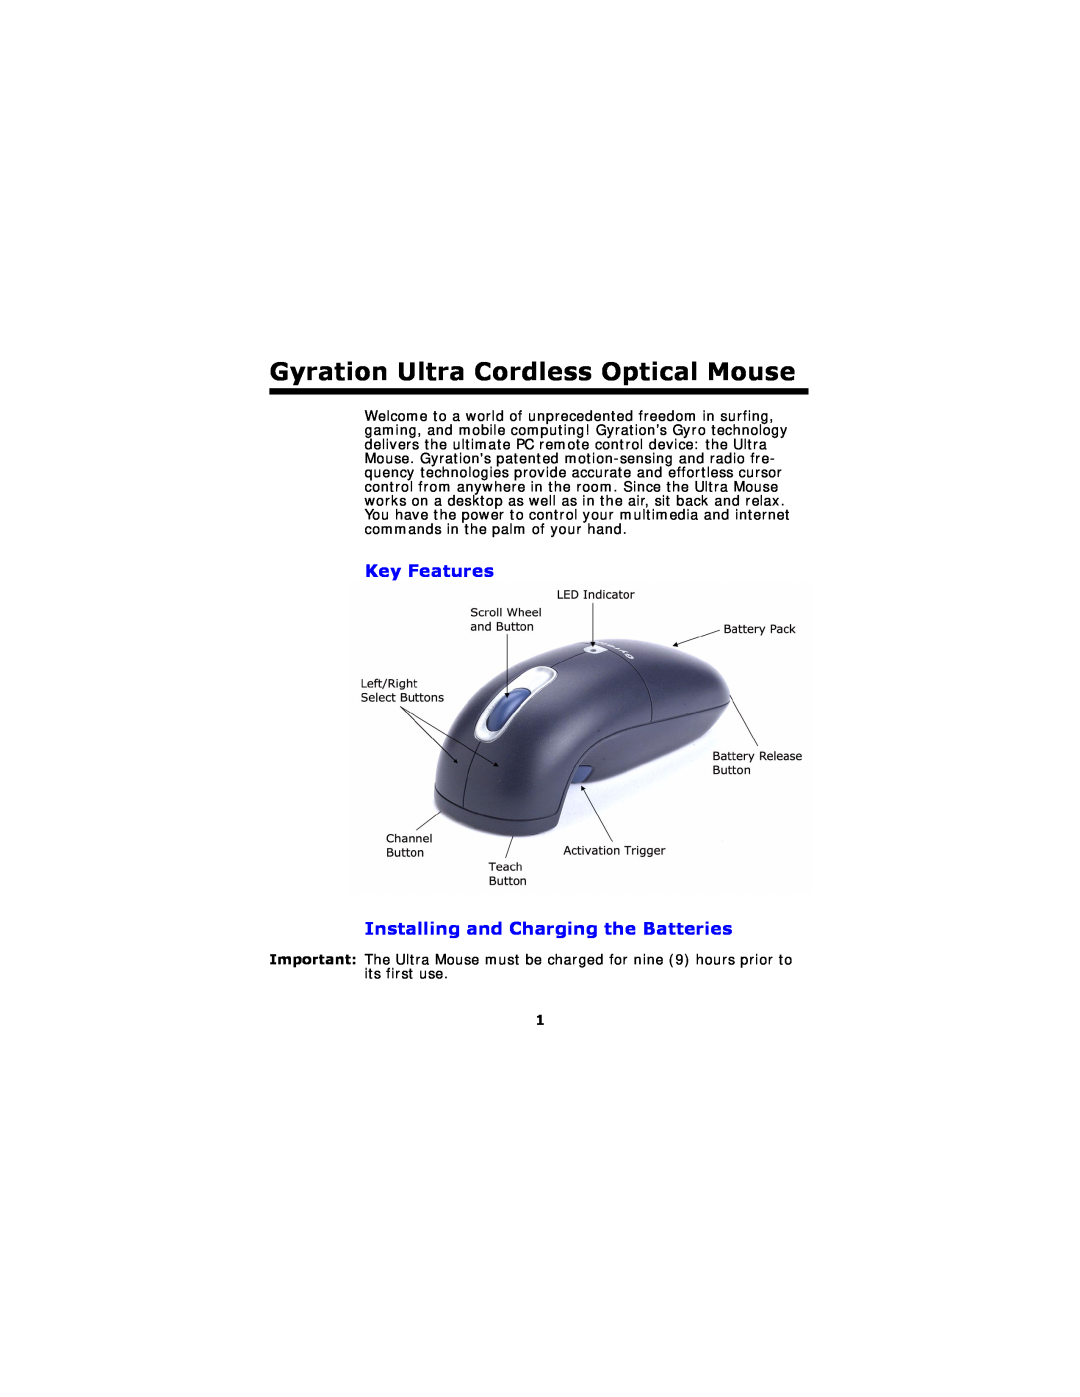 Gyration Ultra Cordless Optical Mouse user manual Key Features Installing and Charging the Batteries 